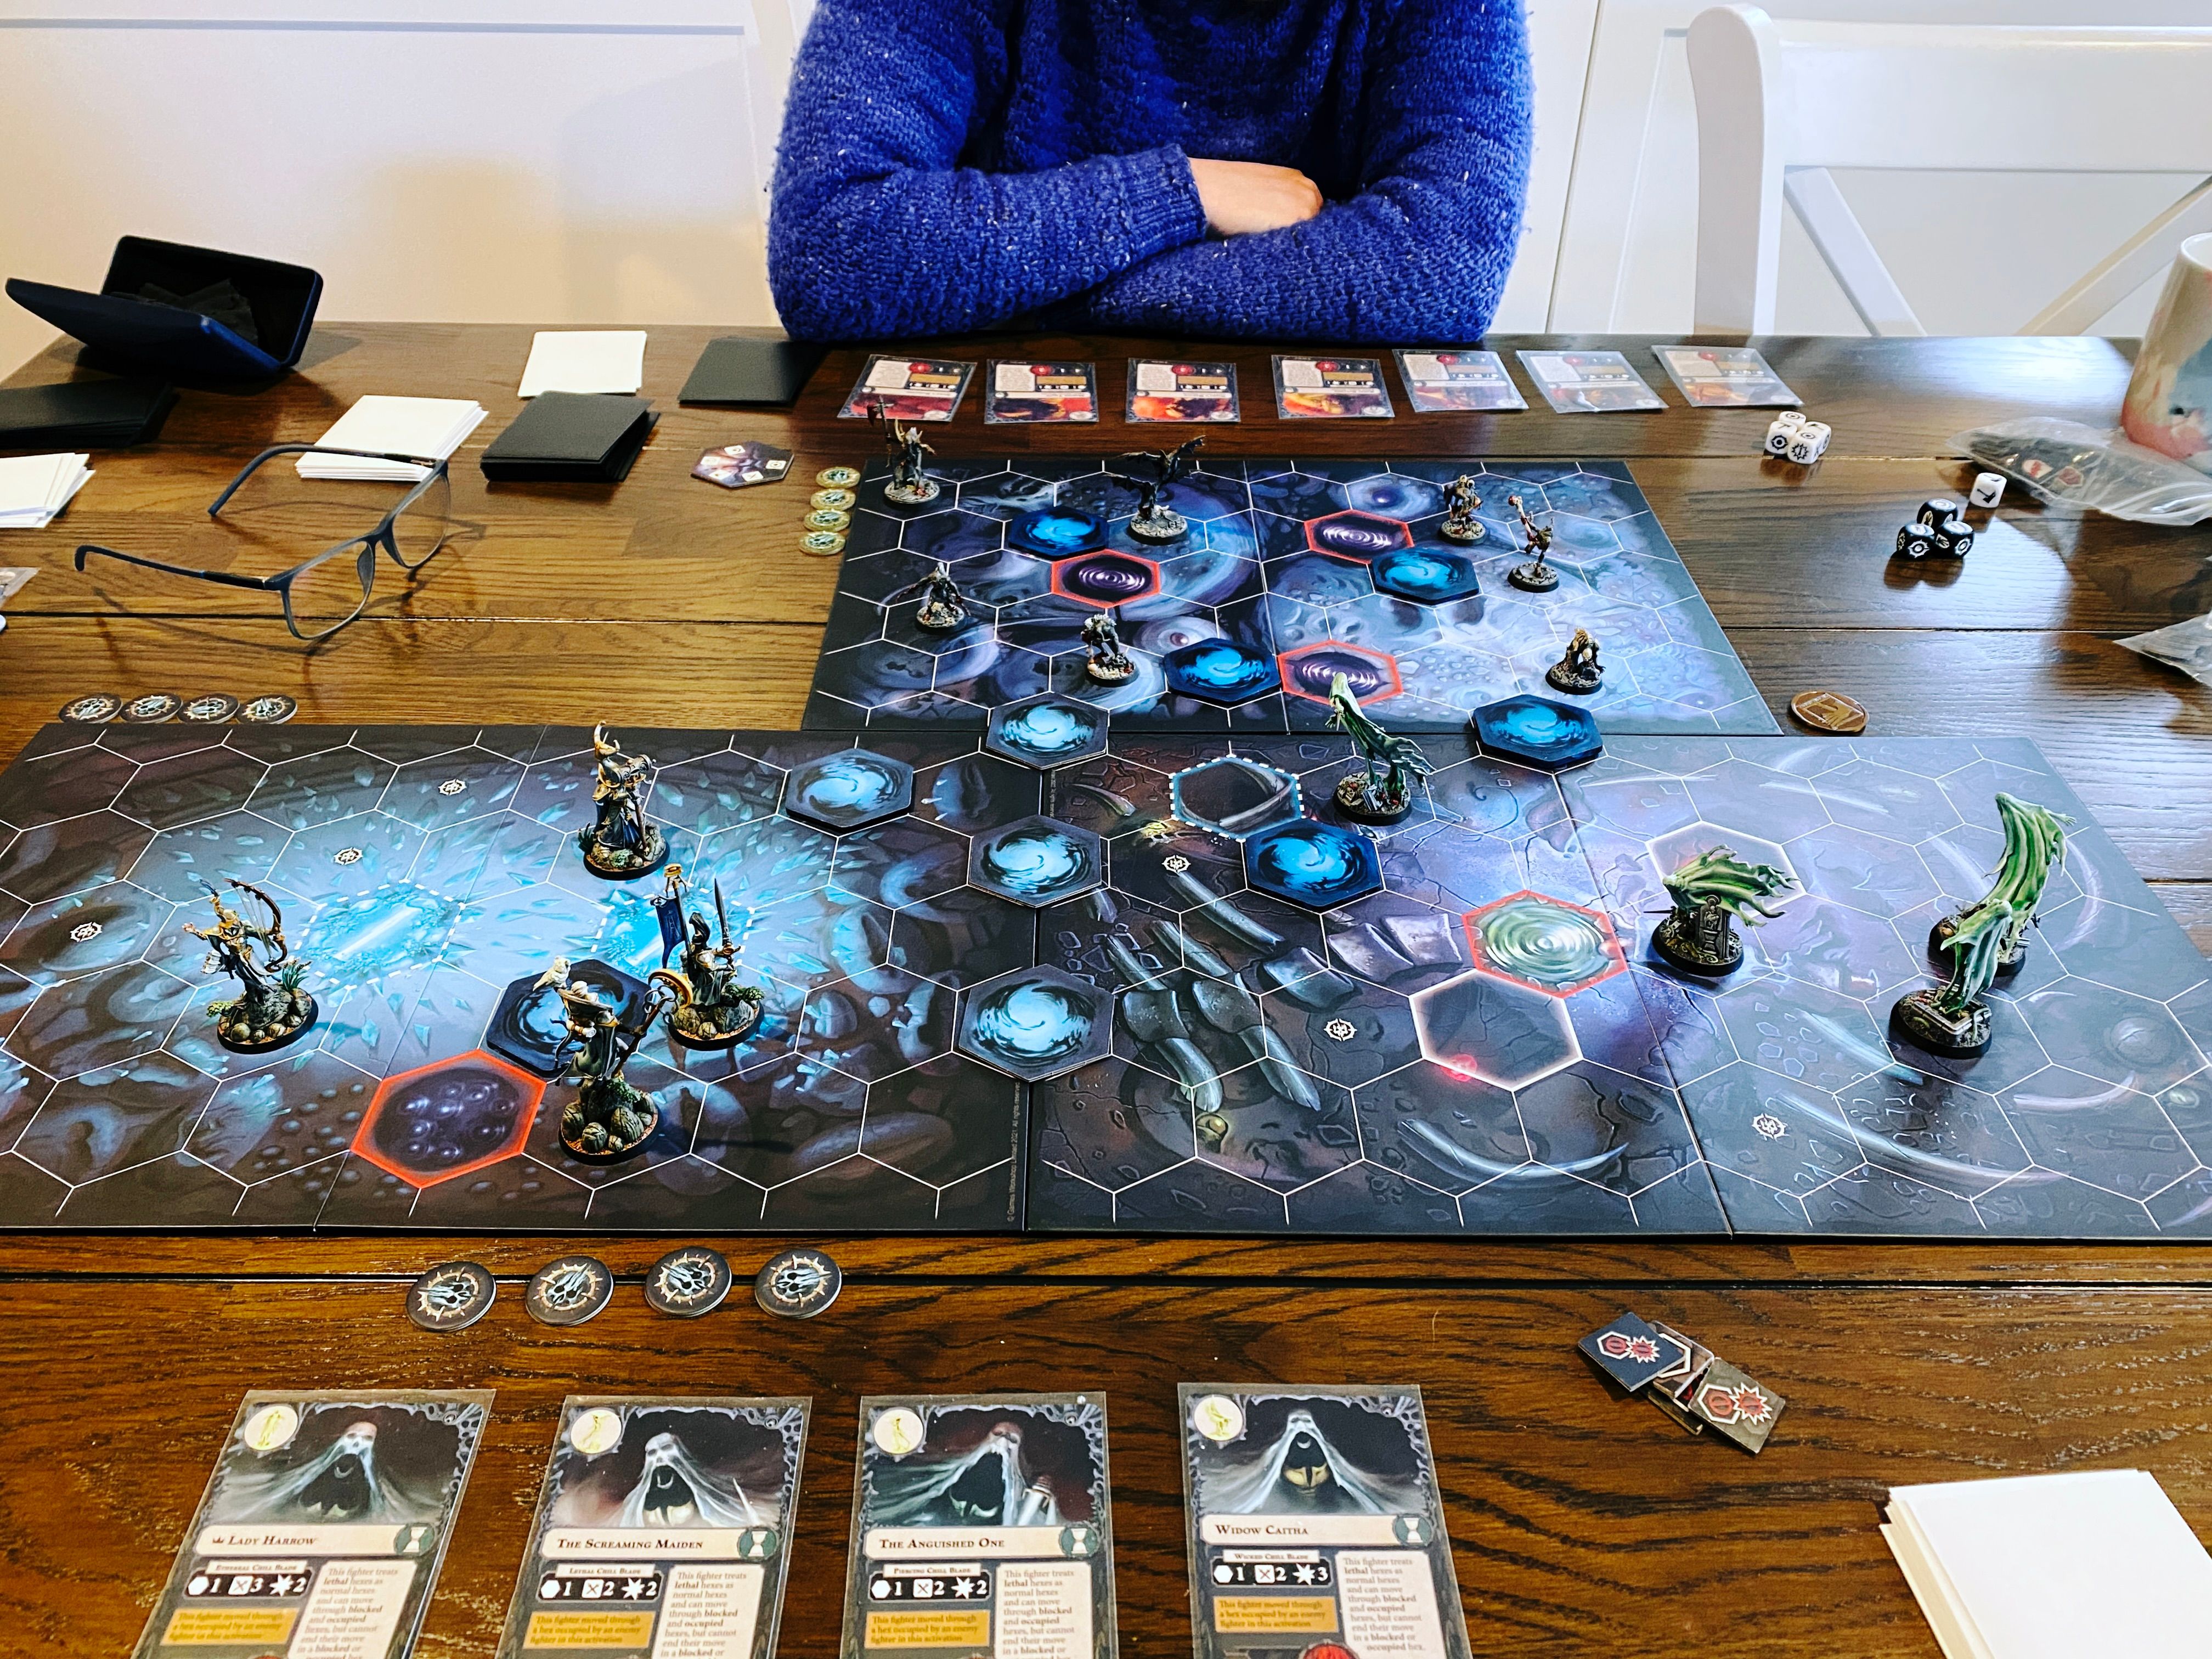 A photo of a three-player game of Warhammer Underworlds. It's a board game played on boards with hexagonal tiles, at the right are four flowing spirits in a sickly green colour, at the back are seven ghouls with rotten green-looking skin and fresh blood like they've been feeding, and at the right at four lithe and elegant elves. There's also cards laid out in front of each player, and various dice and tokens scattered about.